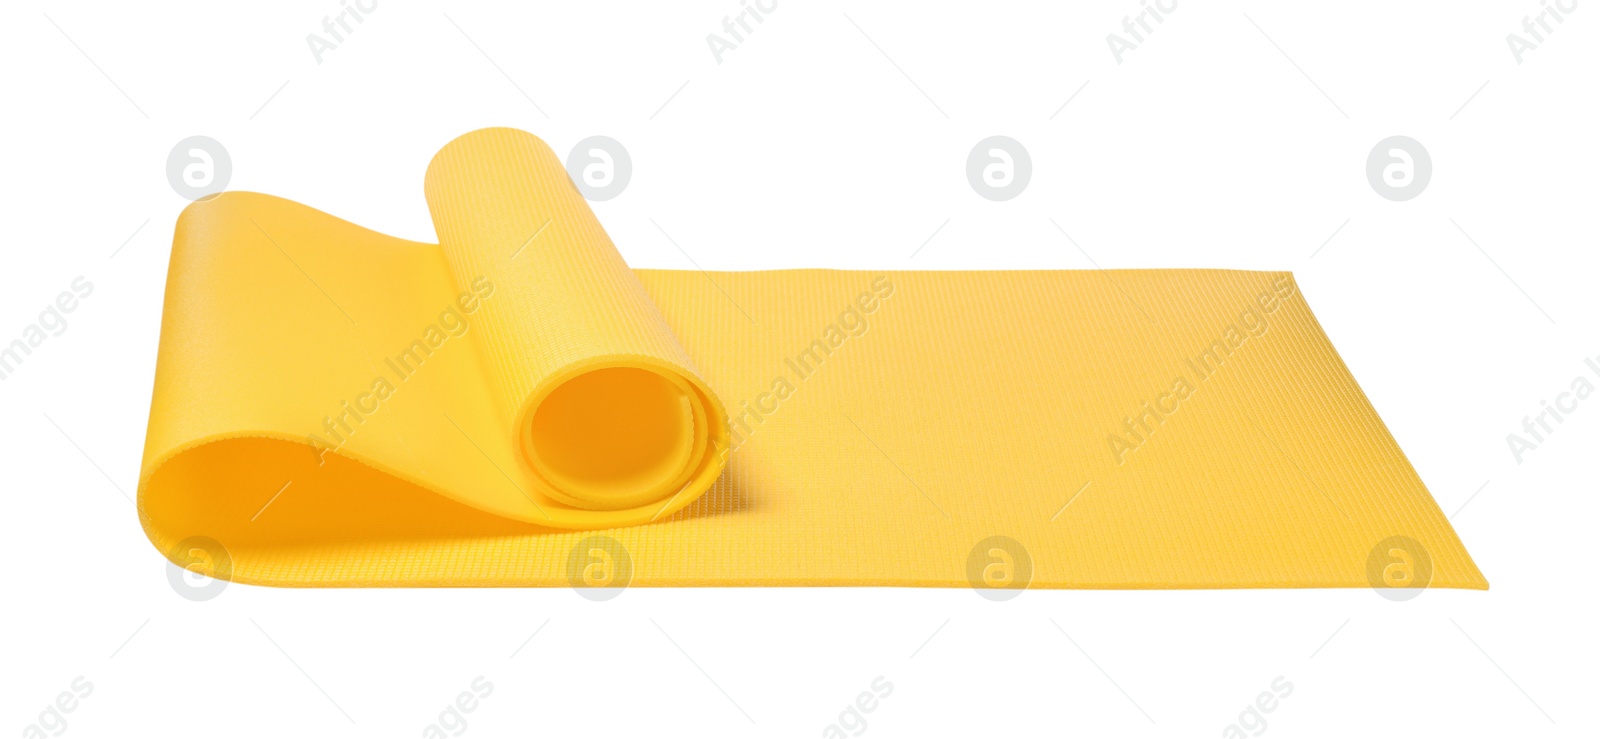 Photo of Bright yellow camping mat isolated on white